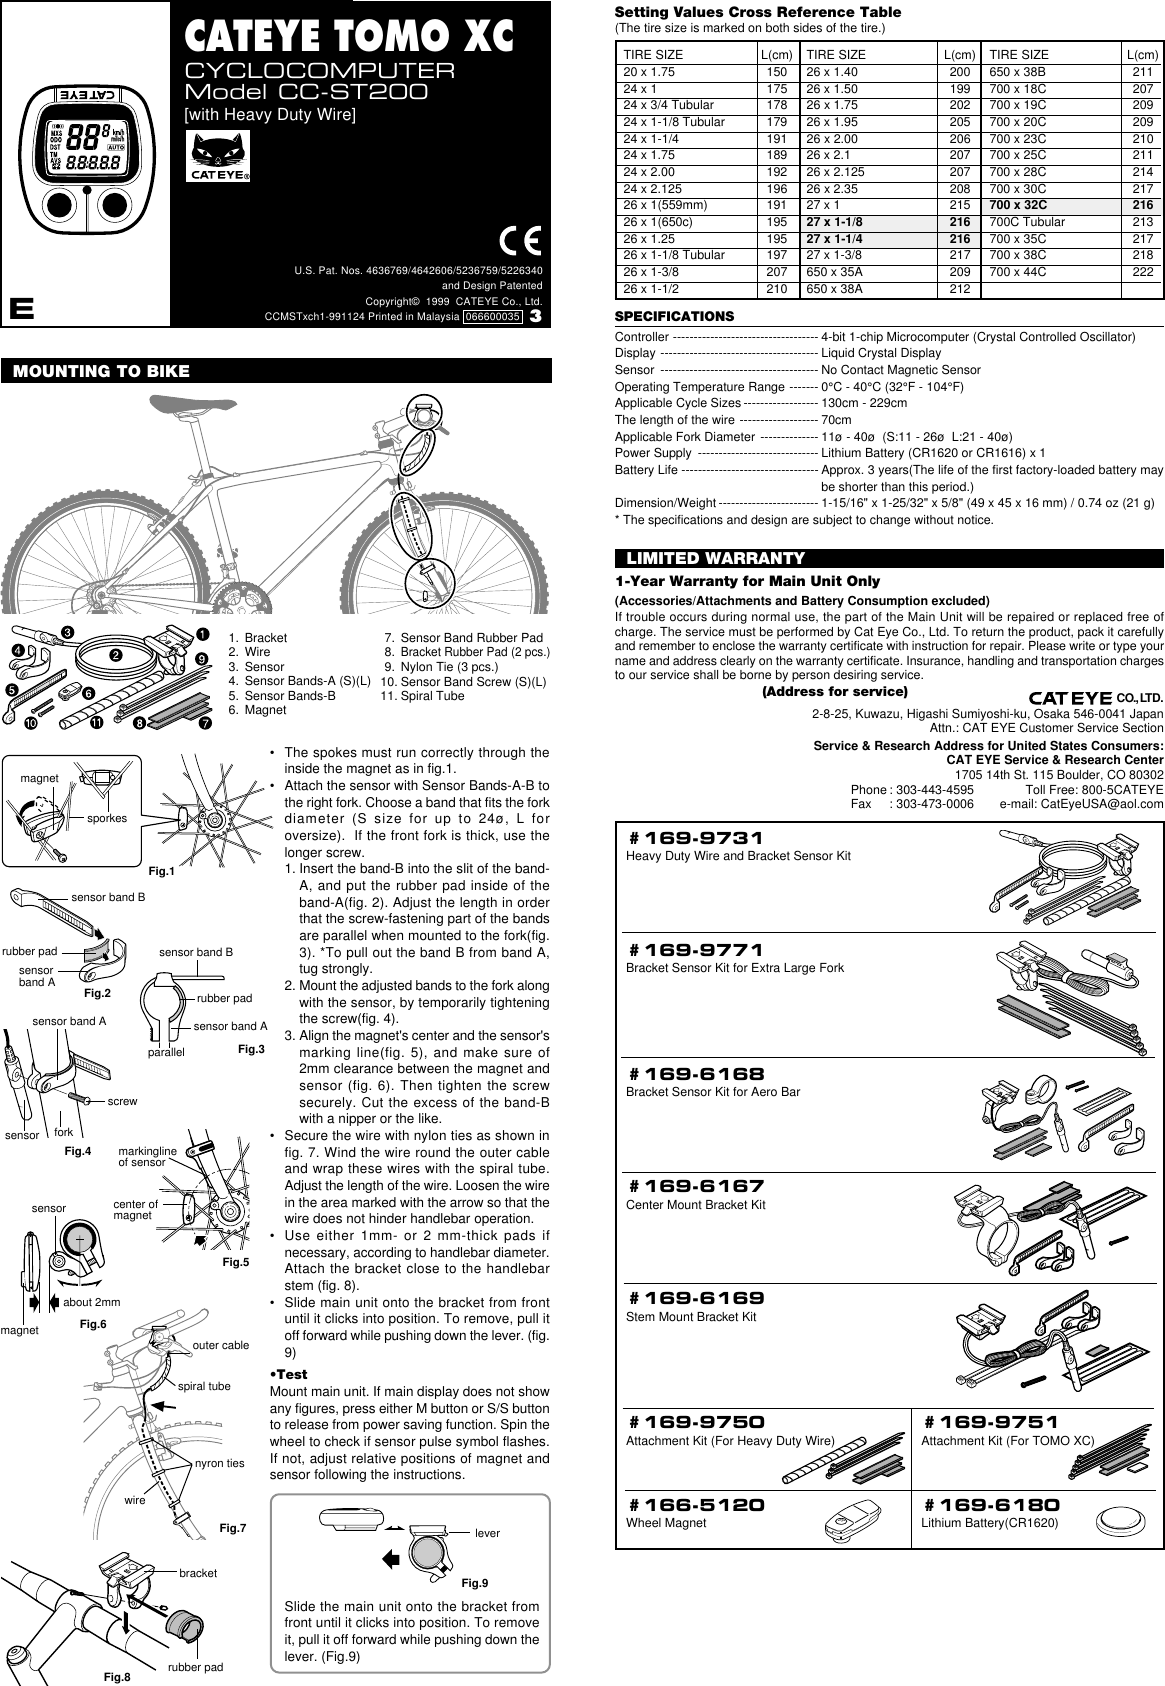 Cateye Cc St200 Users Information Guide TOMO XC E